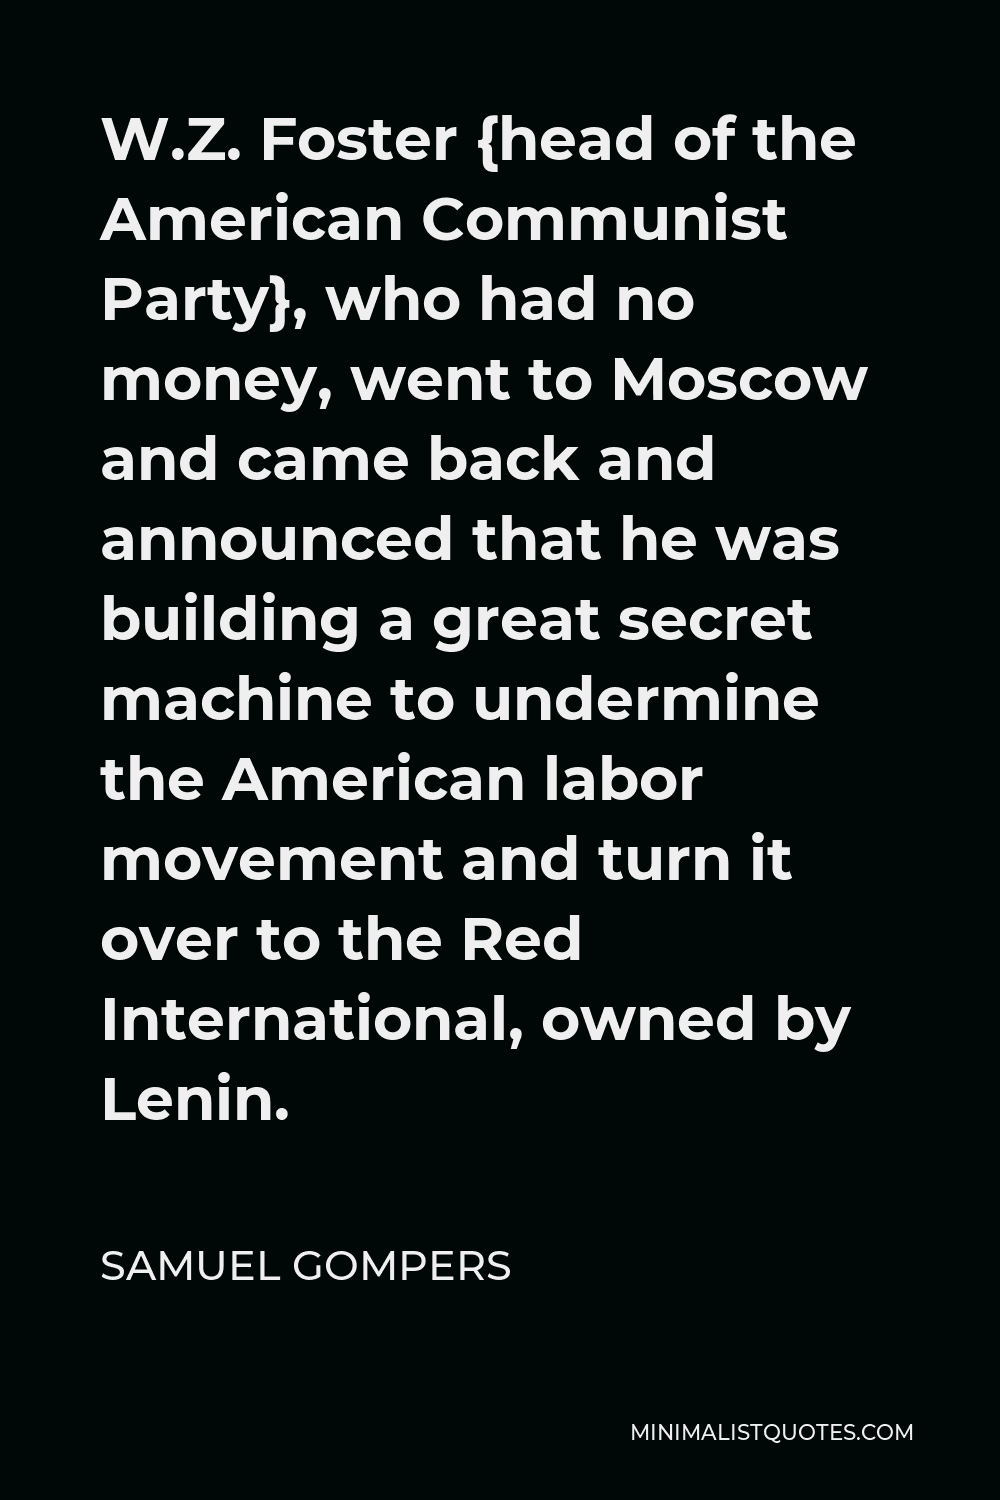 Samuel Gompers Quote - W.Z. Foster {head of the American Communist Party}, who had no money, went to Moscow and came back and announced that he was building a great secret machine to undermine the American labor movement and turn it over to the Red International, owned by Lenin.